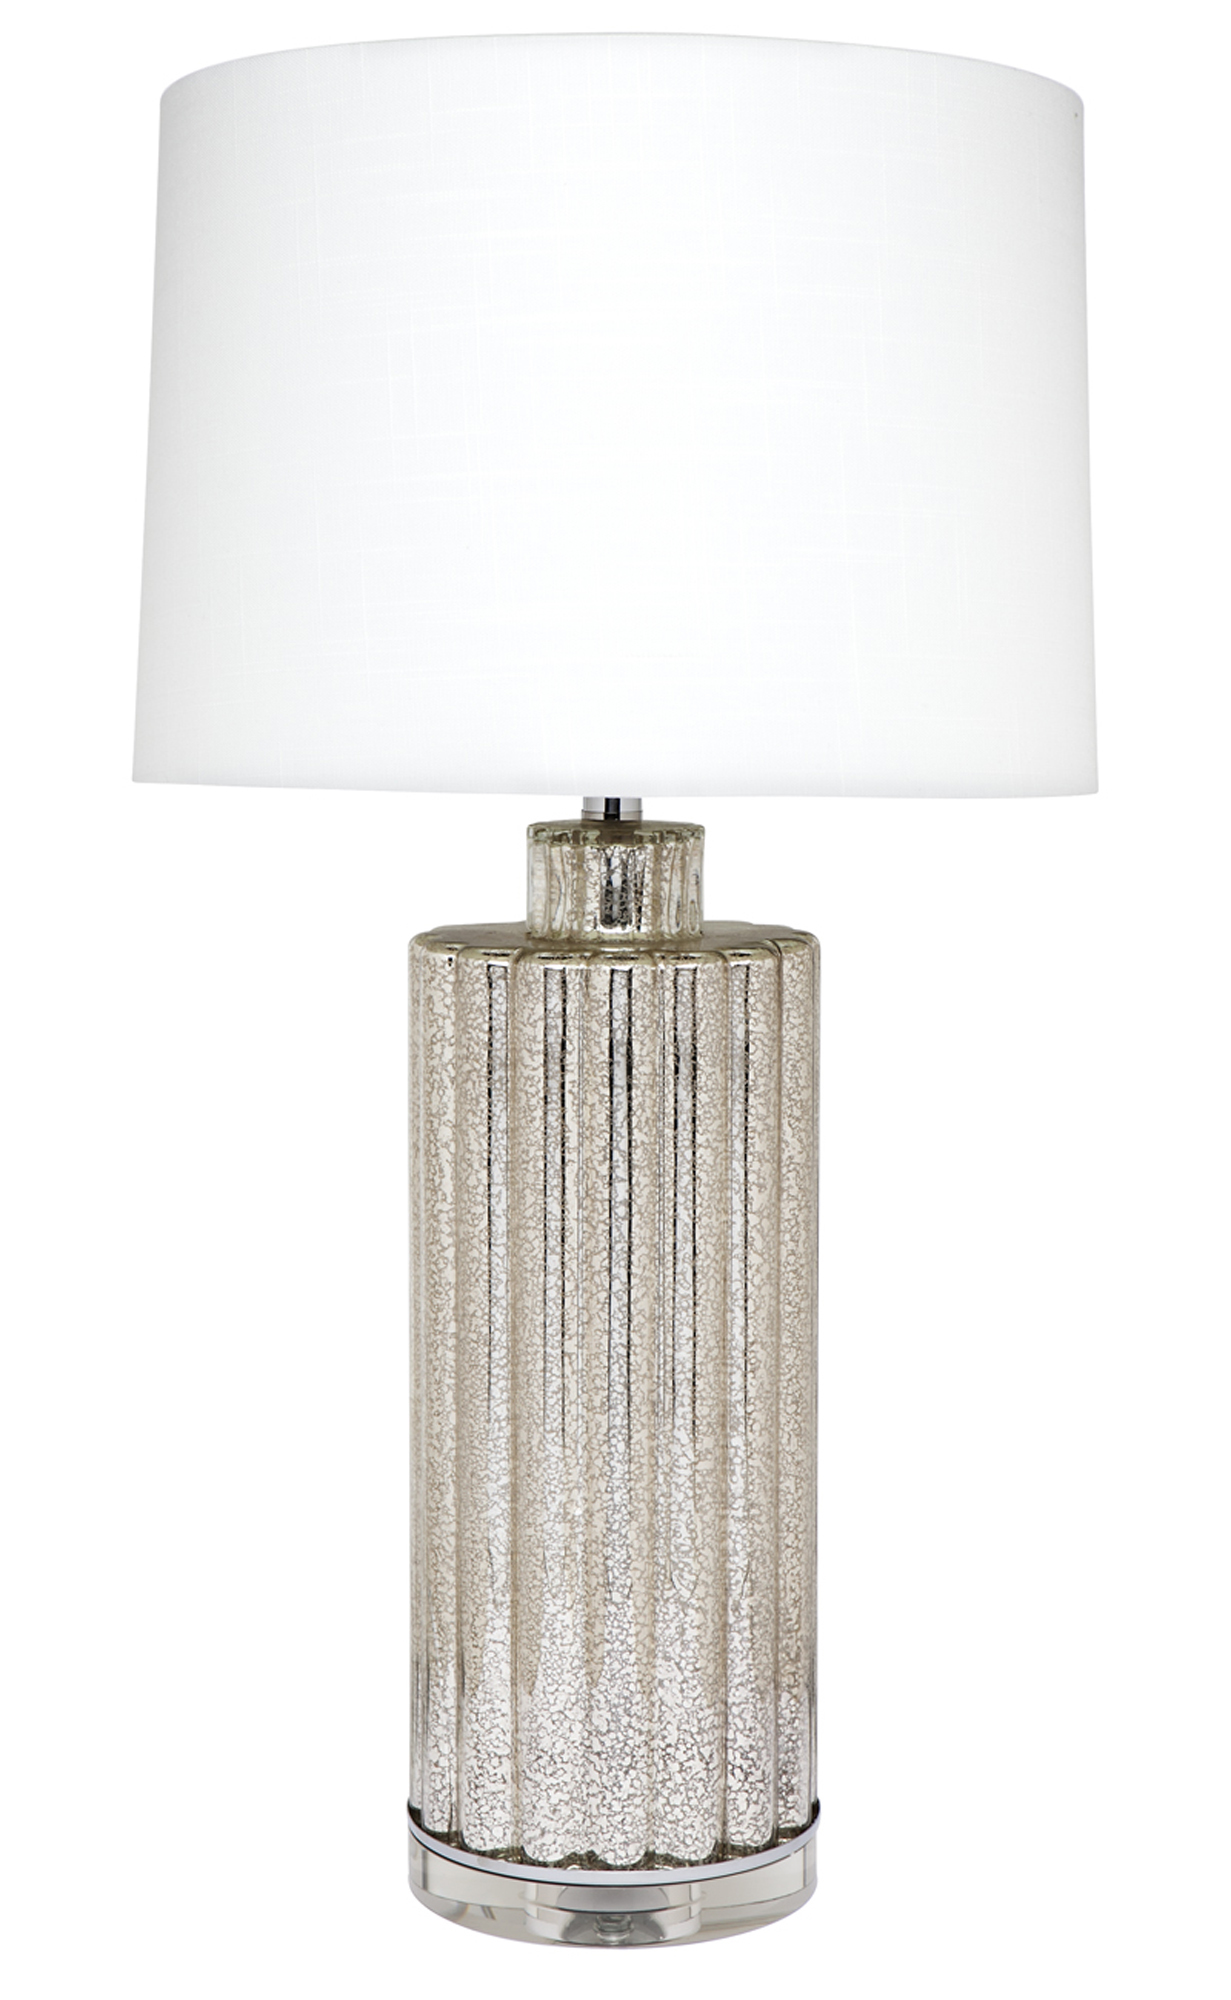 Allure Glass Crystal Table Lamp, Cylinder Crystal Table Lamp